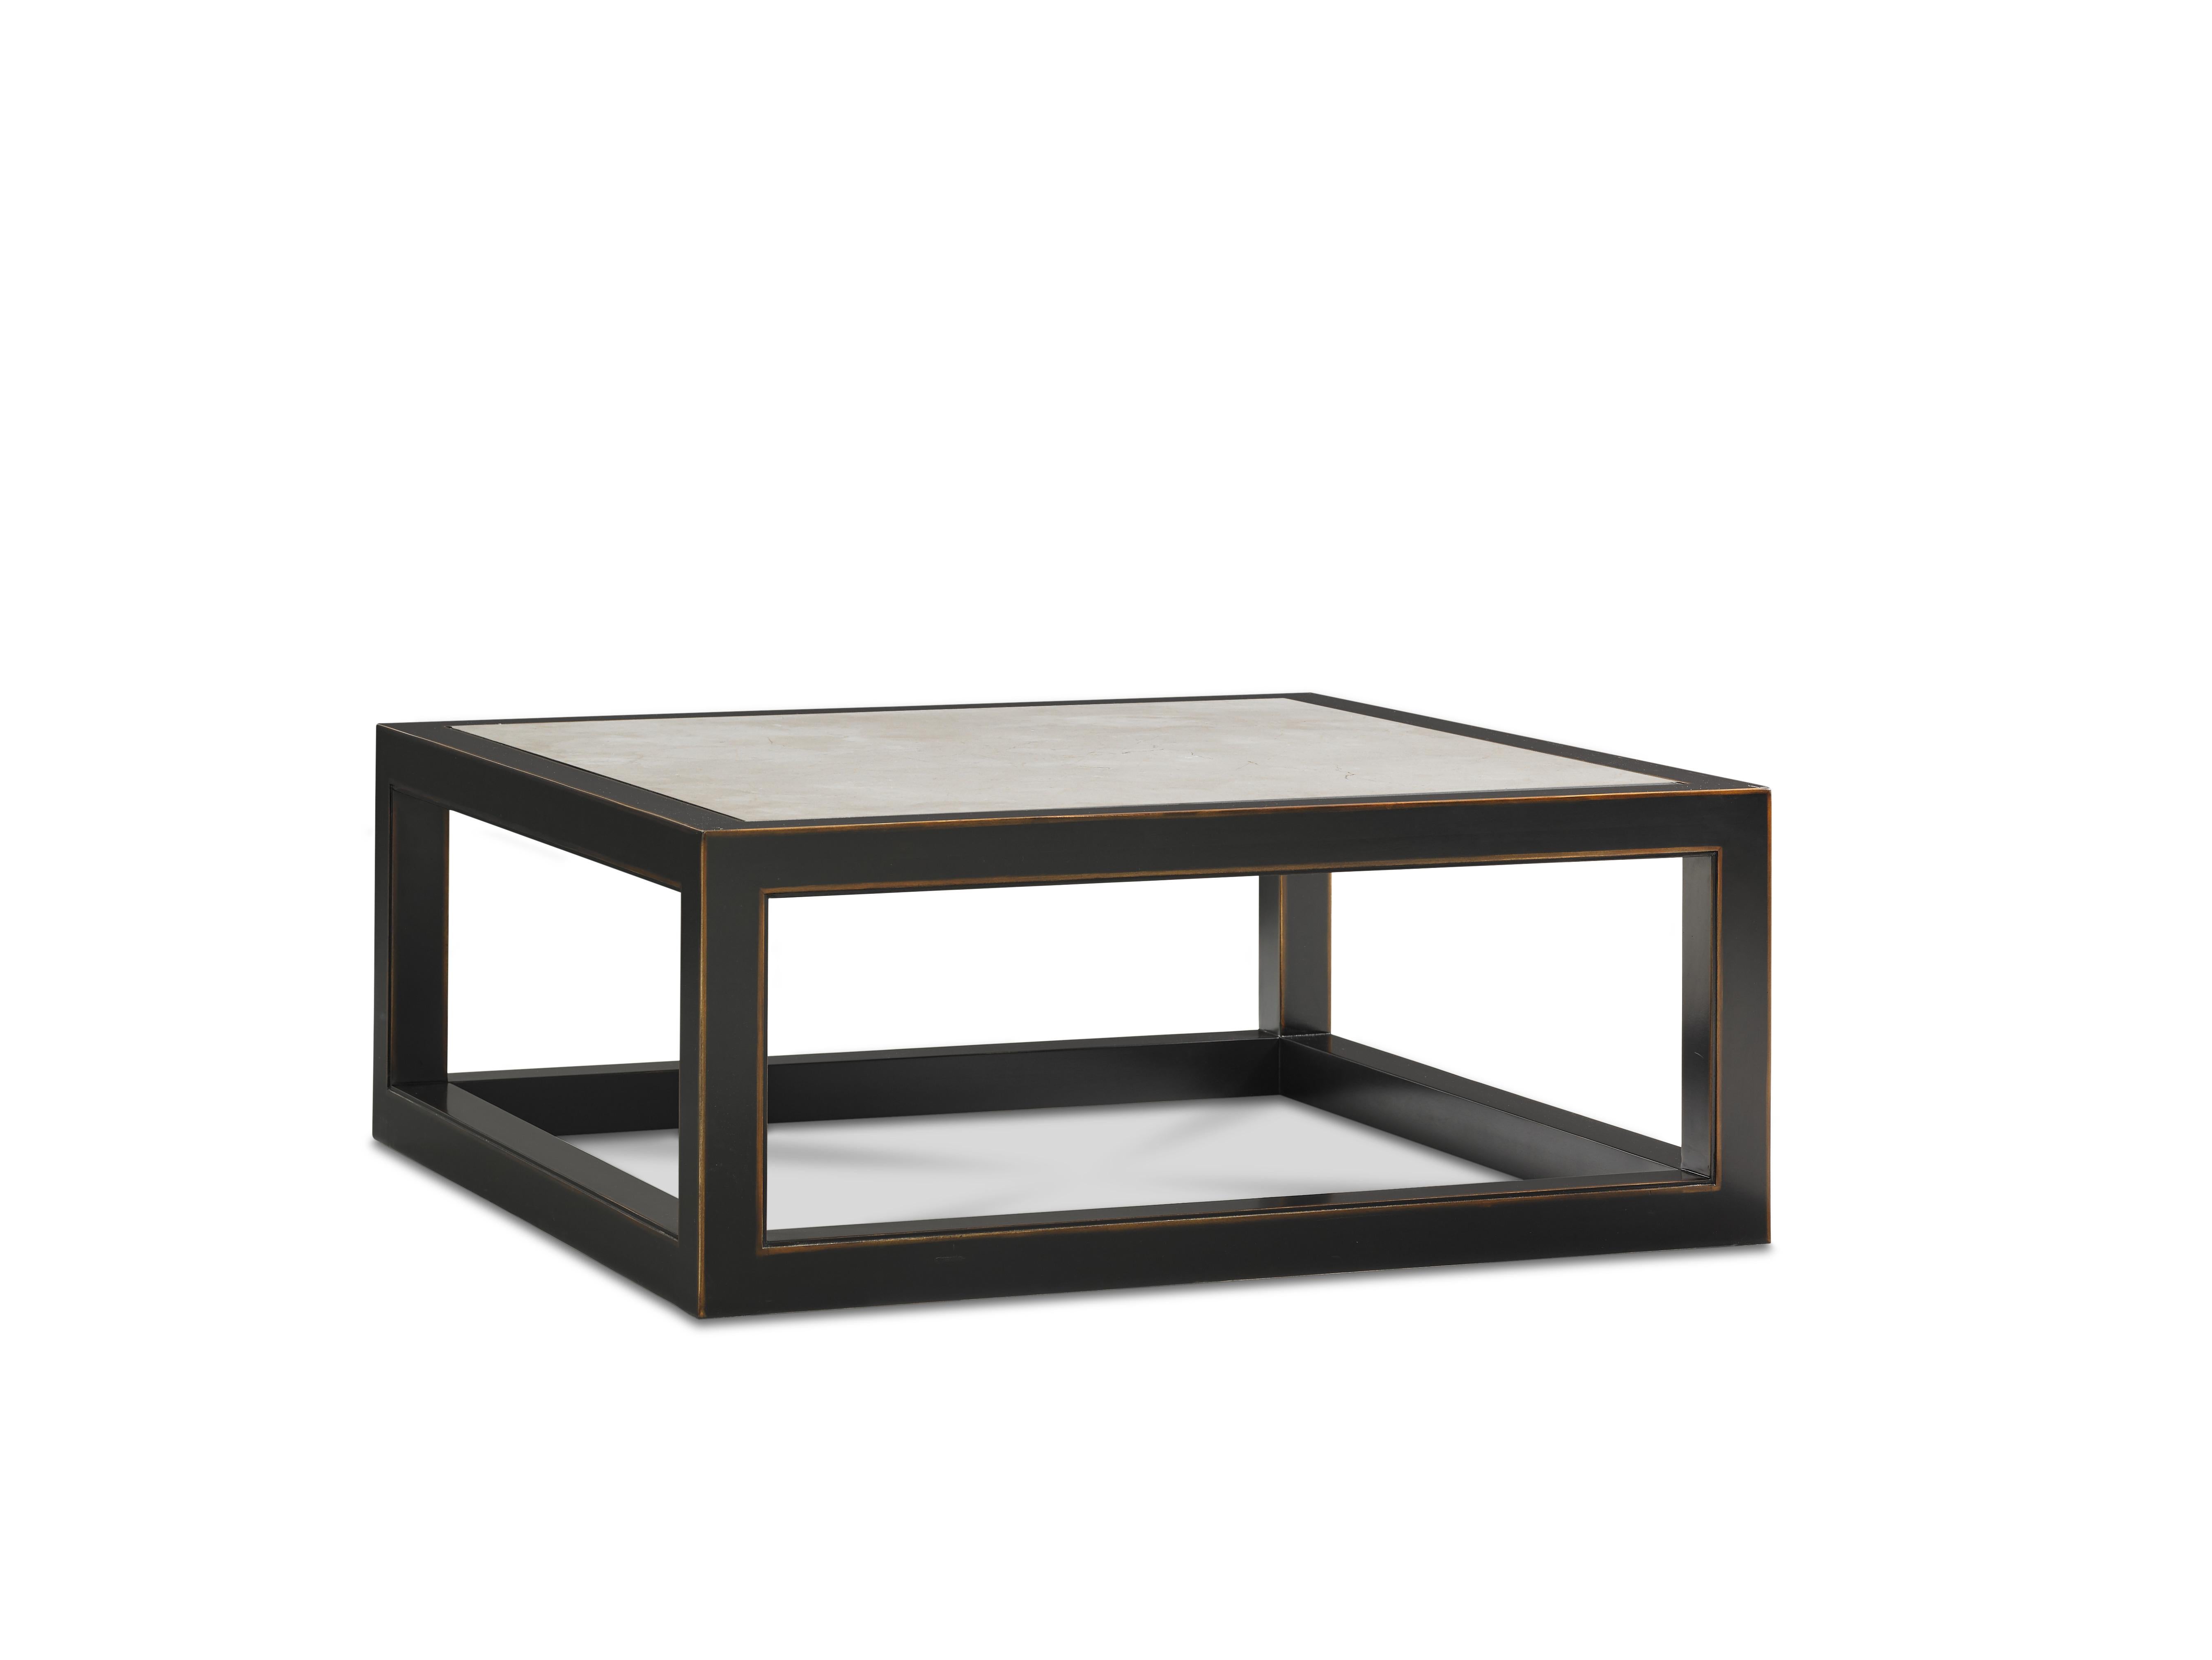 Our Ming table is loyal to age-old traditional Chinese style, but incorporates modern sensibilities with its clean lines, rubbed ebony finish and black granite top. A wonderful statement piece for a minimalist living room, it is sure to be the focal